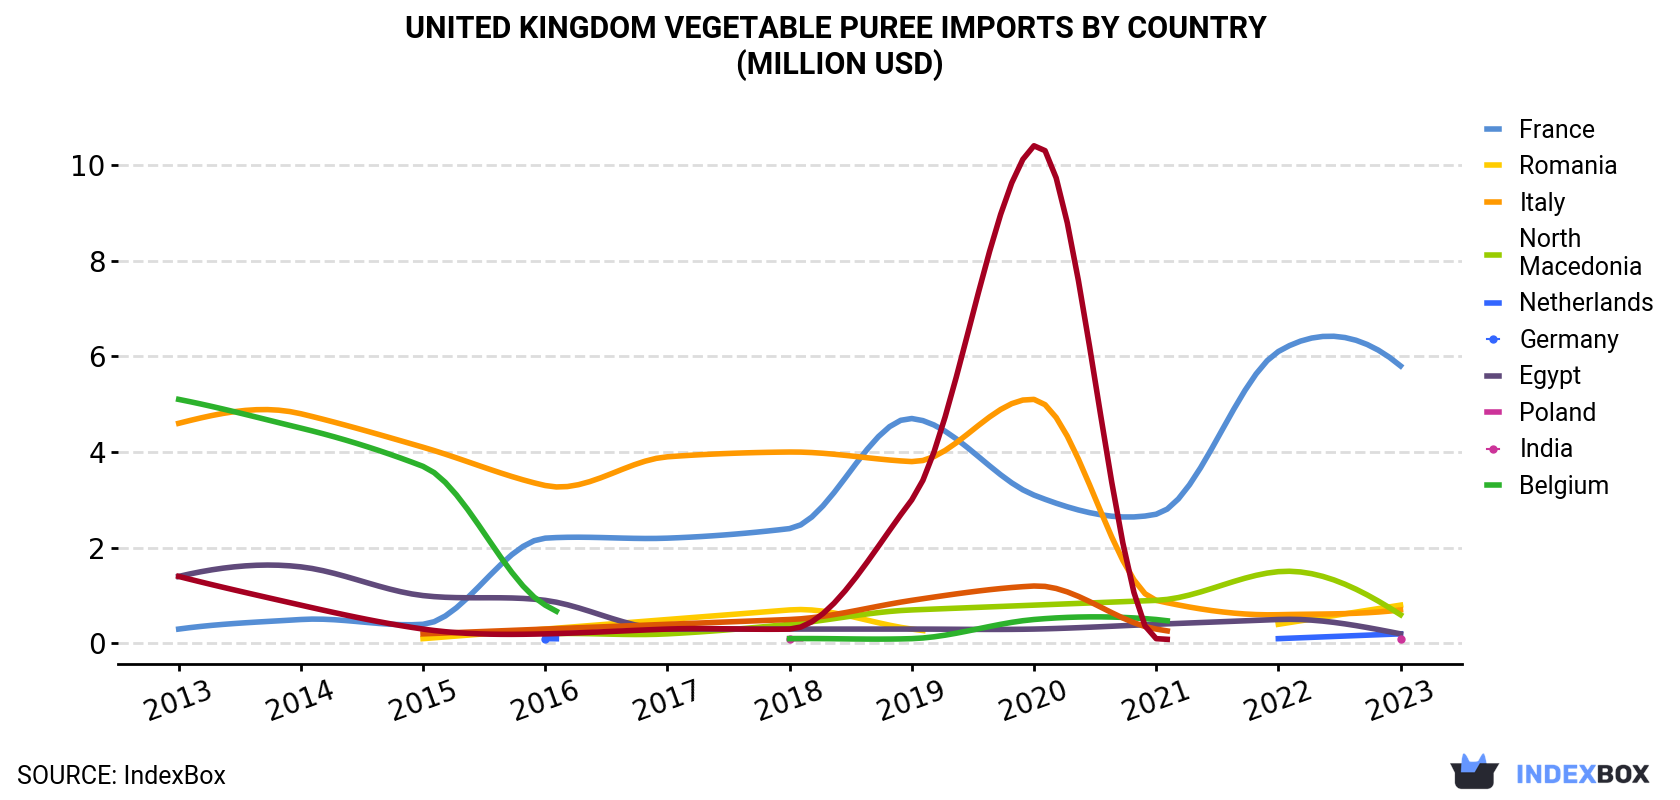 United Kingdom Vegetable Puree Imports By Country (Million USD)